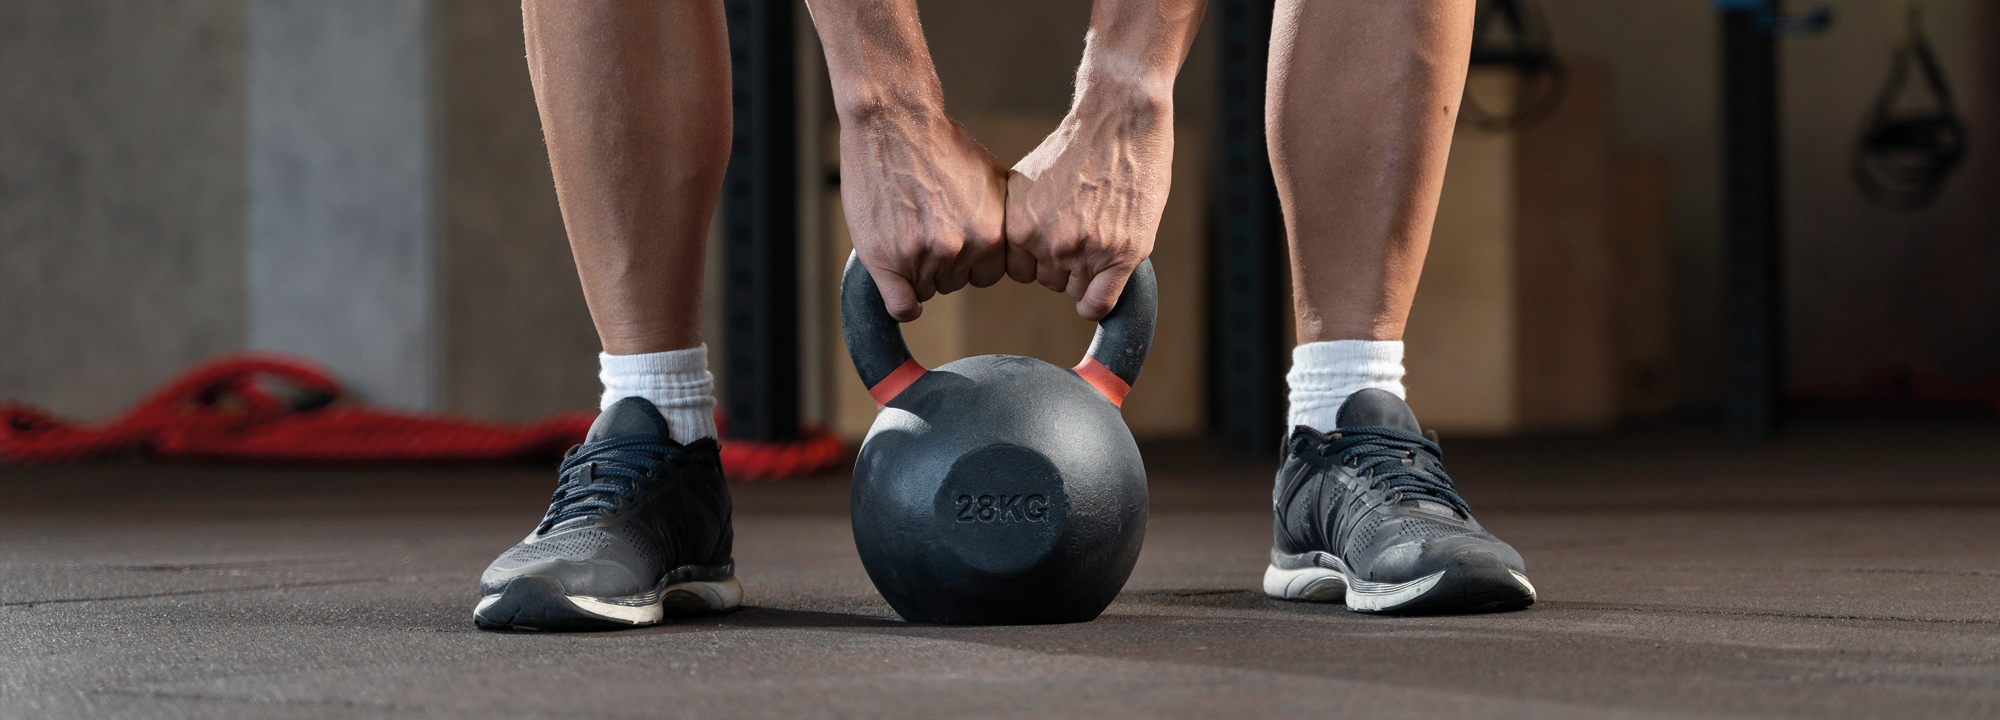 A kettlebell-only class focused on improving your strength, flexibility and cardiovascular endurance.